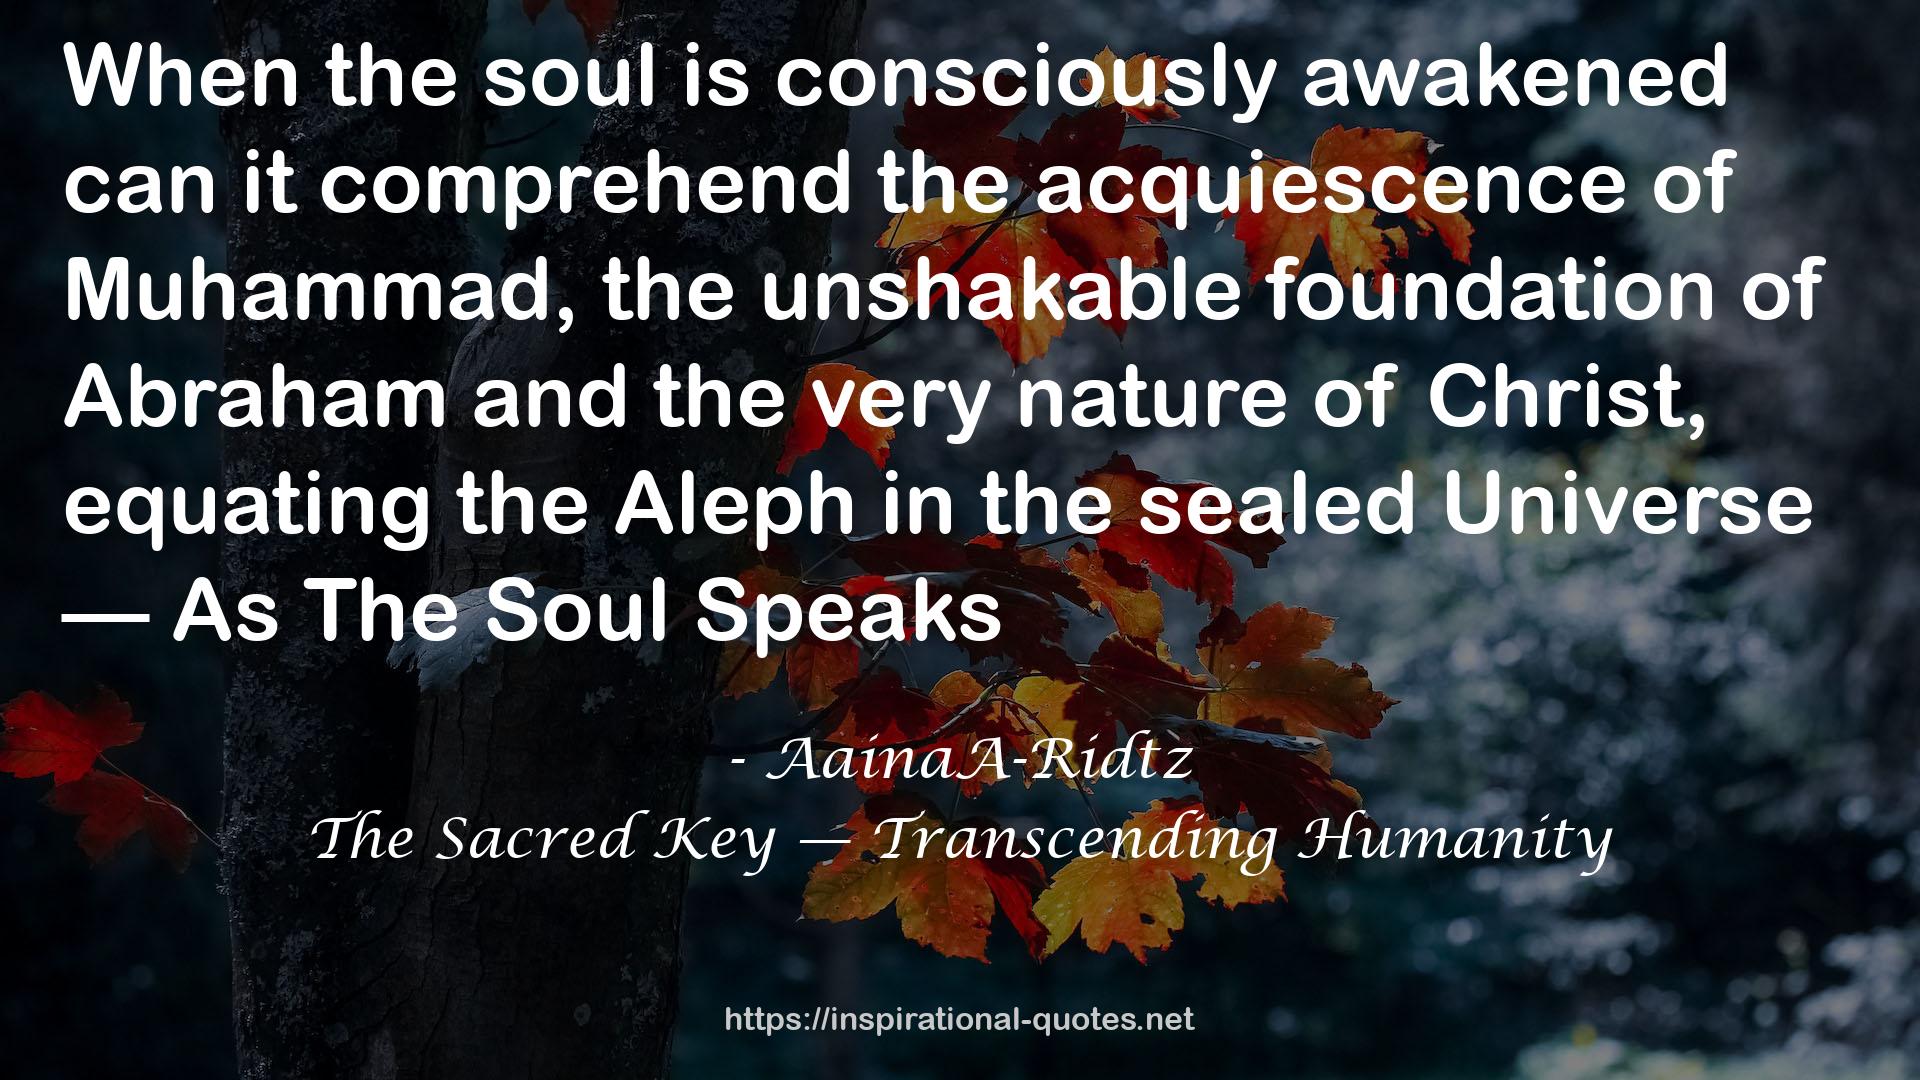 The Sacred Key — Transcending Humanity QUOTES